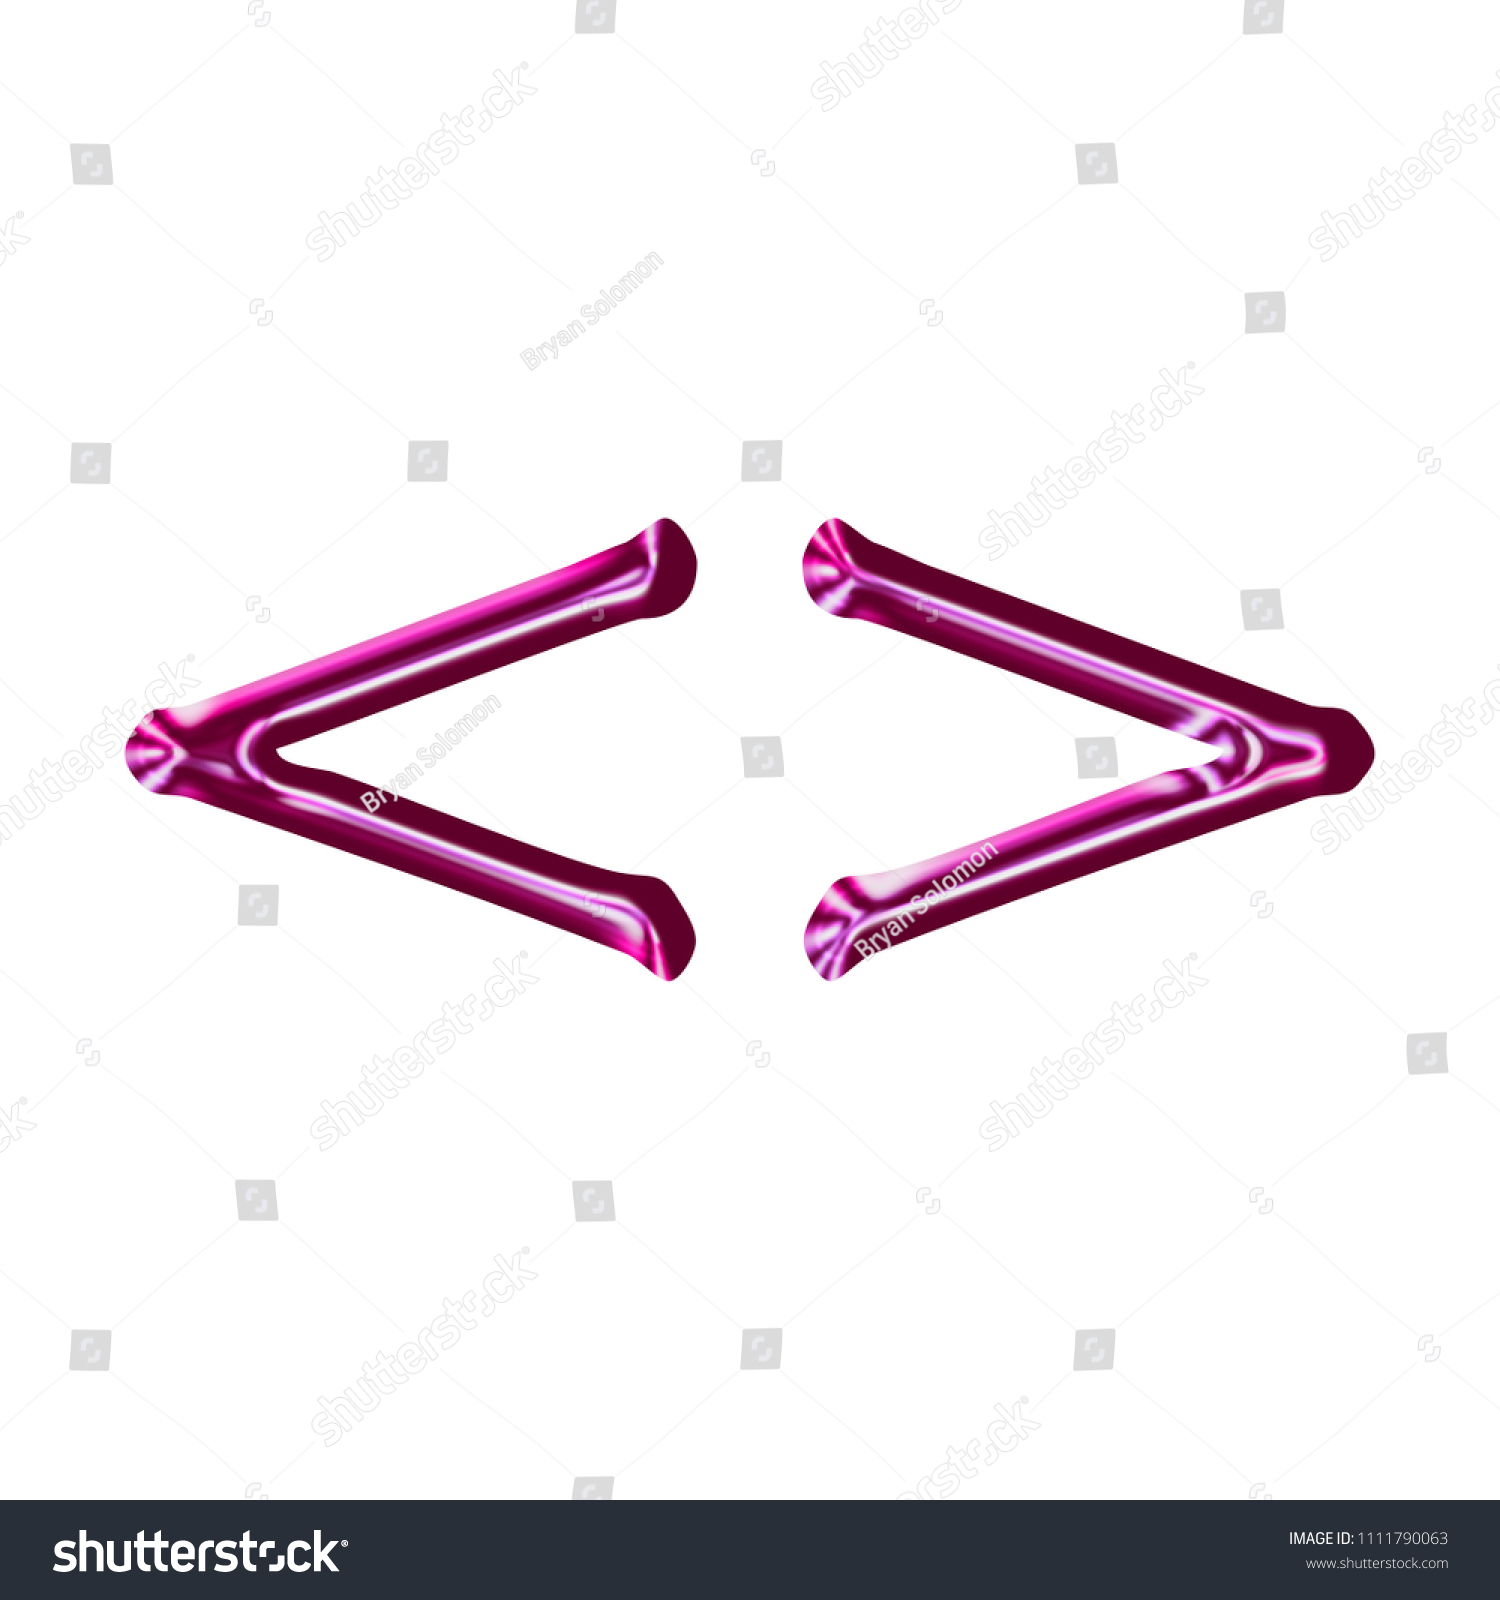 Shining metallic pink glass in a 3D illustration with a shiny reflective edge pink color in an elegant loose font isolated on a white background with clipping path #1111790063